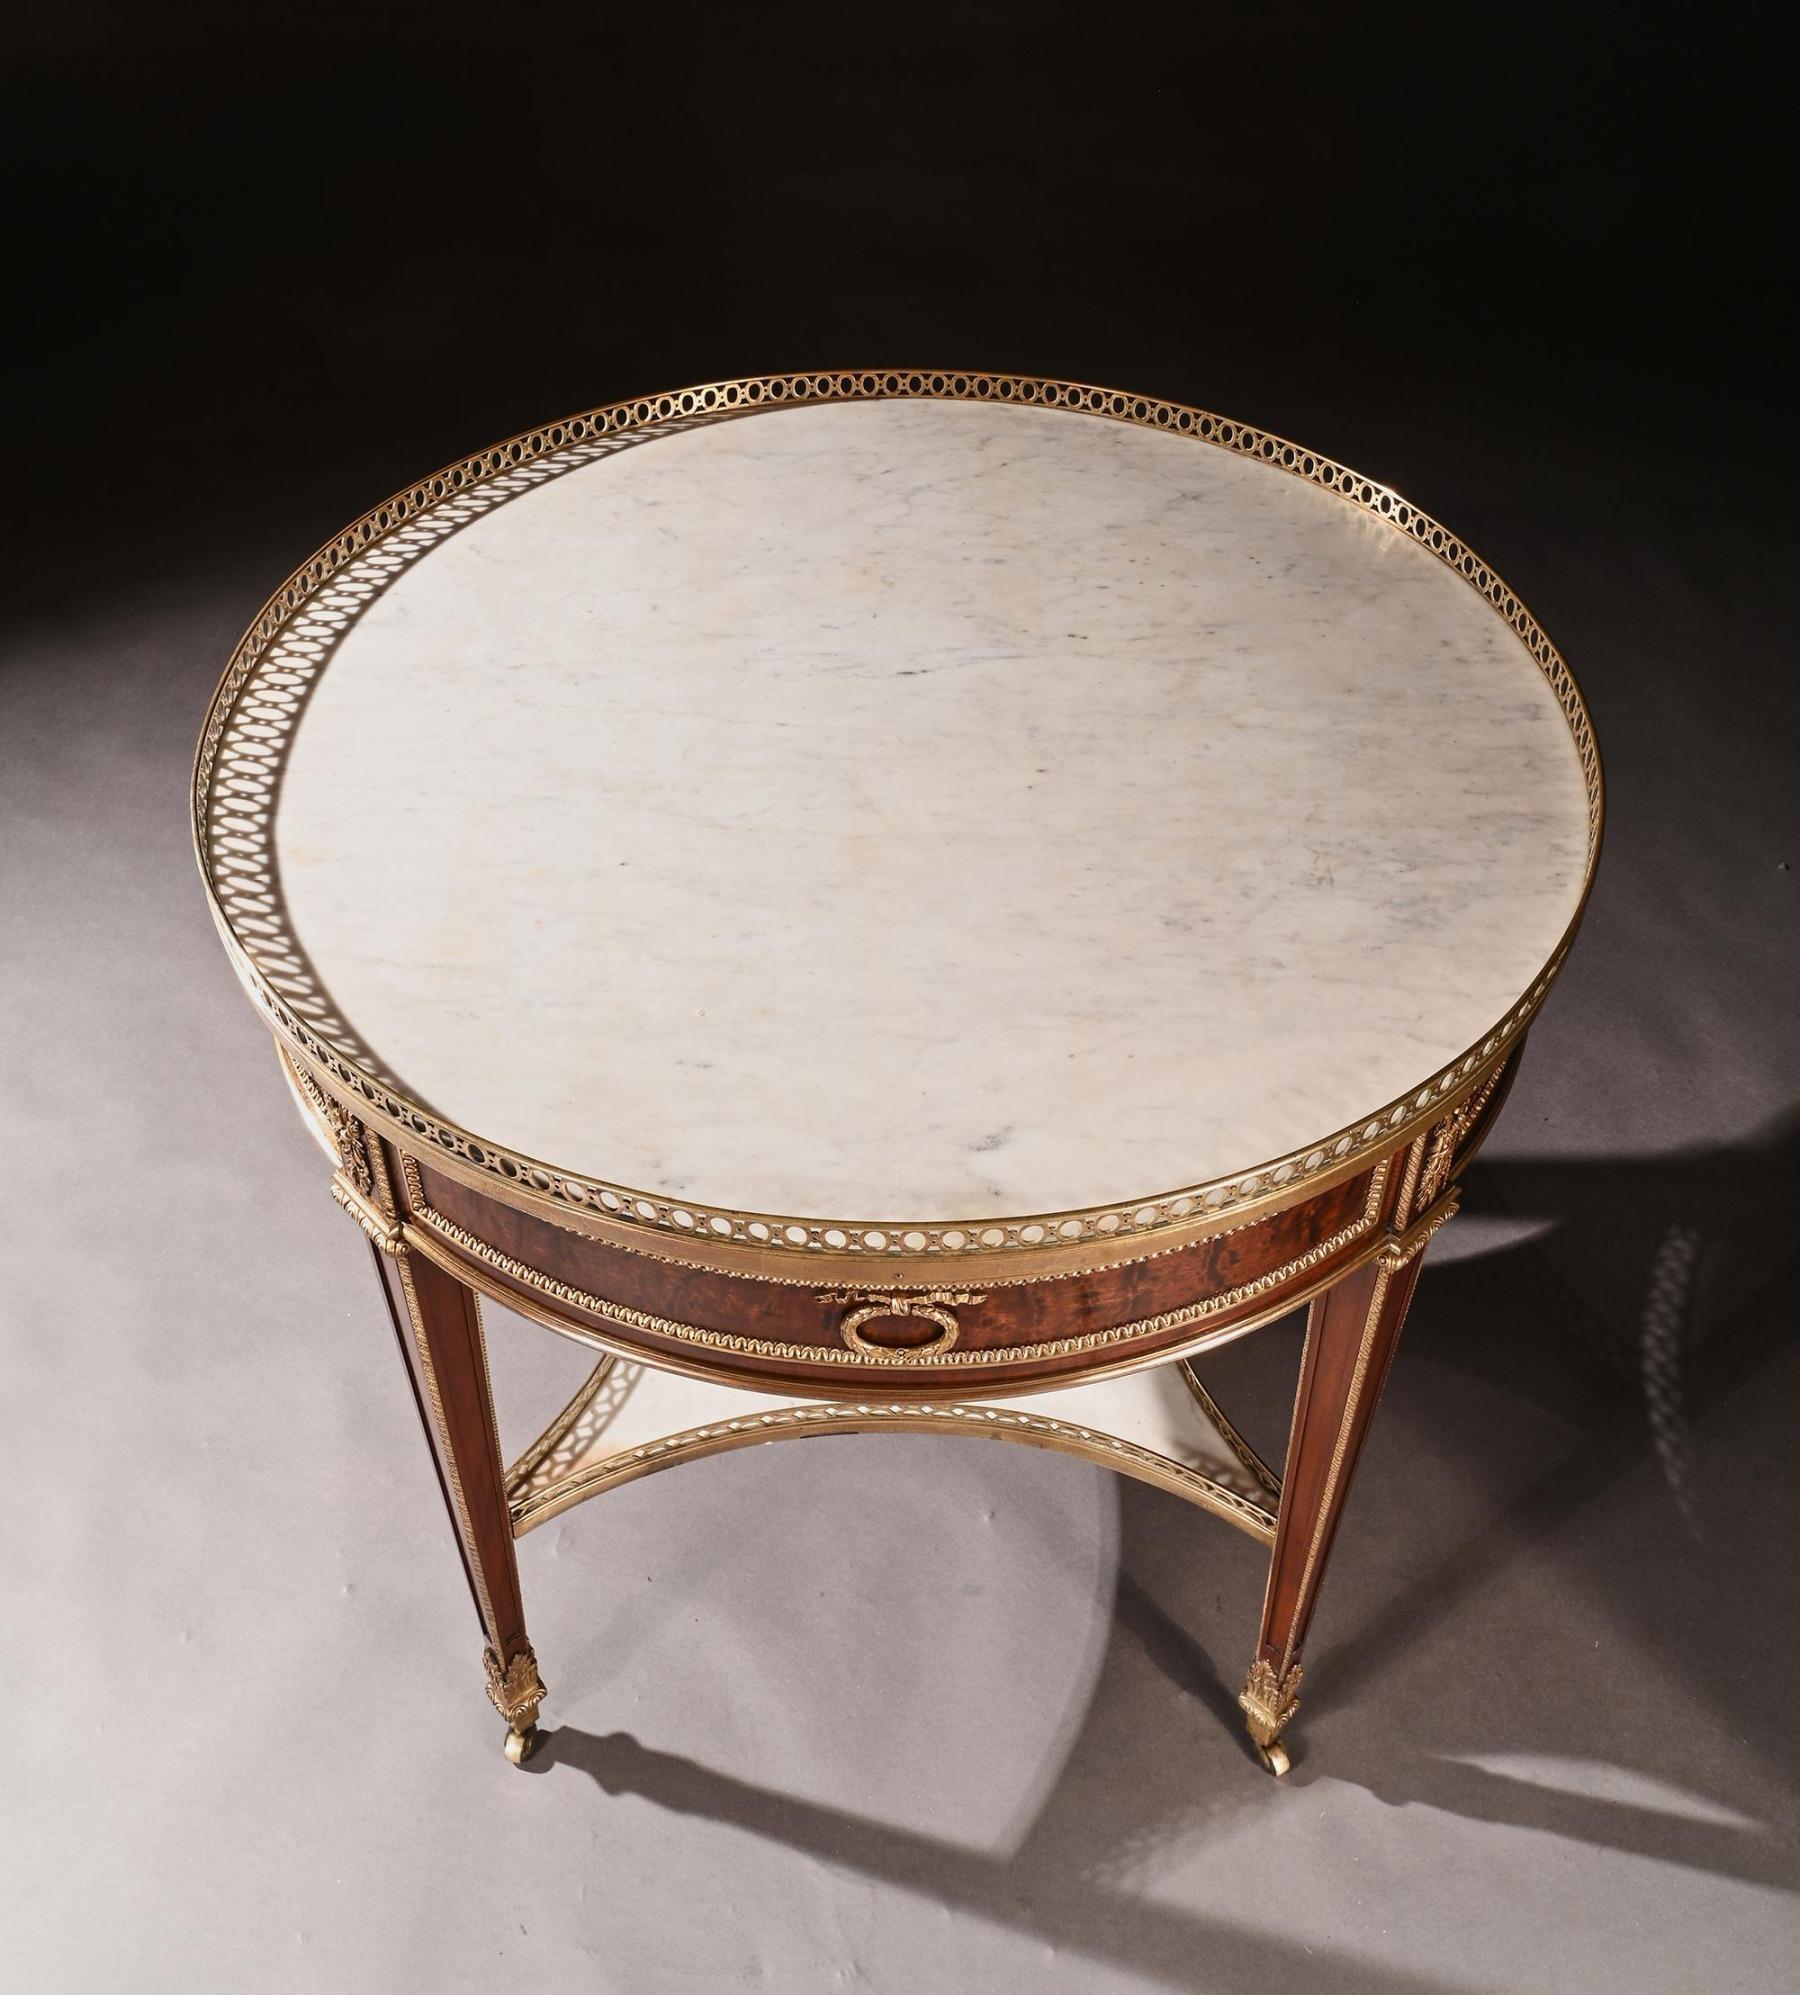 Exceptional G. Durand 19th C. Mahogany & Gilt Bronze Gueridon Bouillotte Table 3